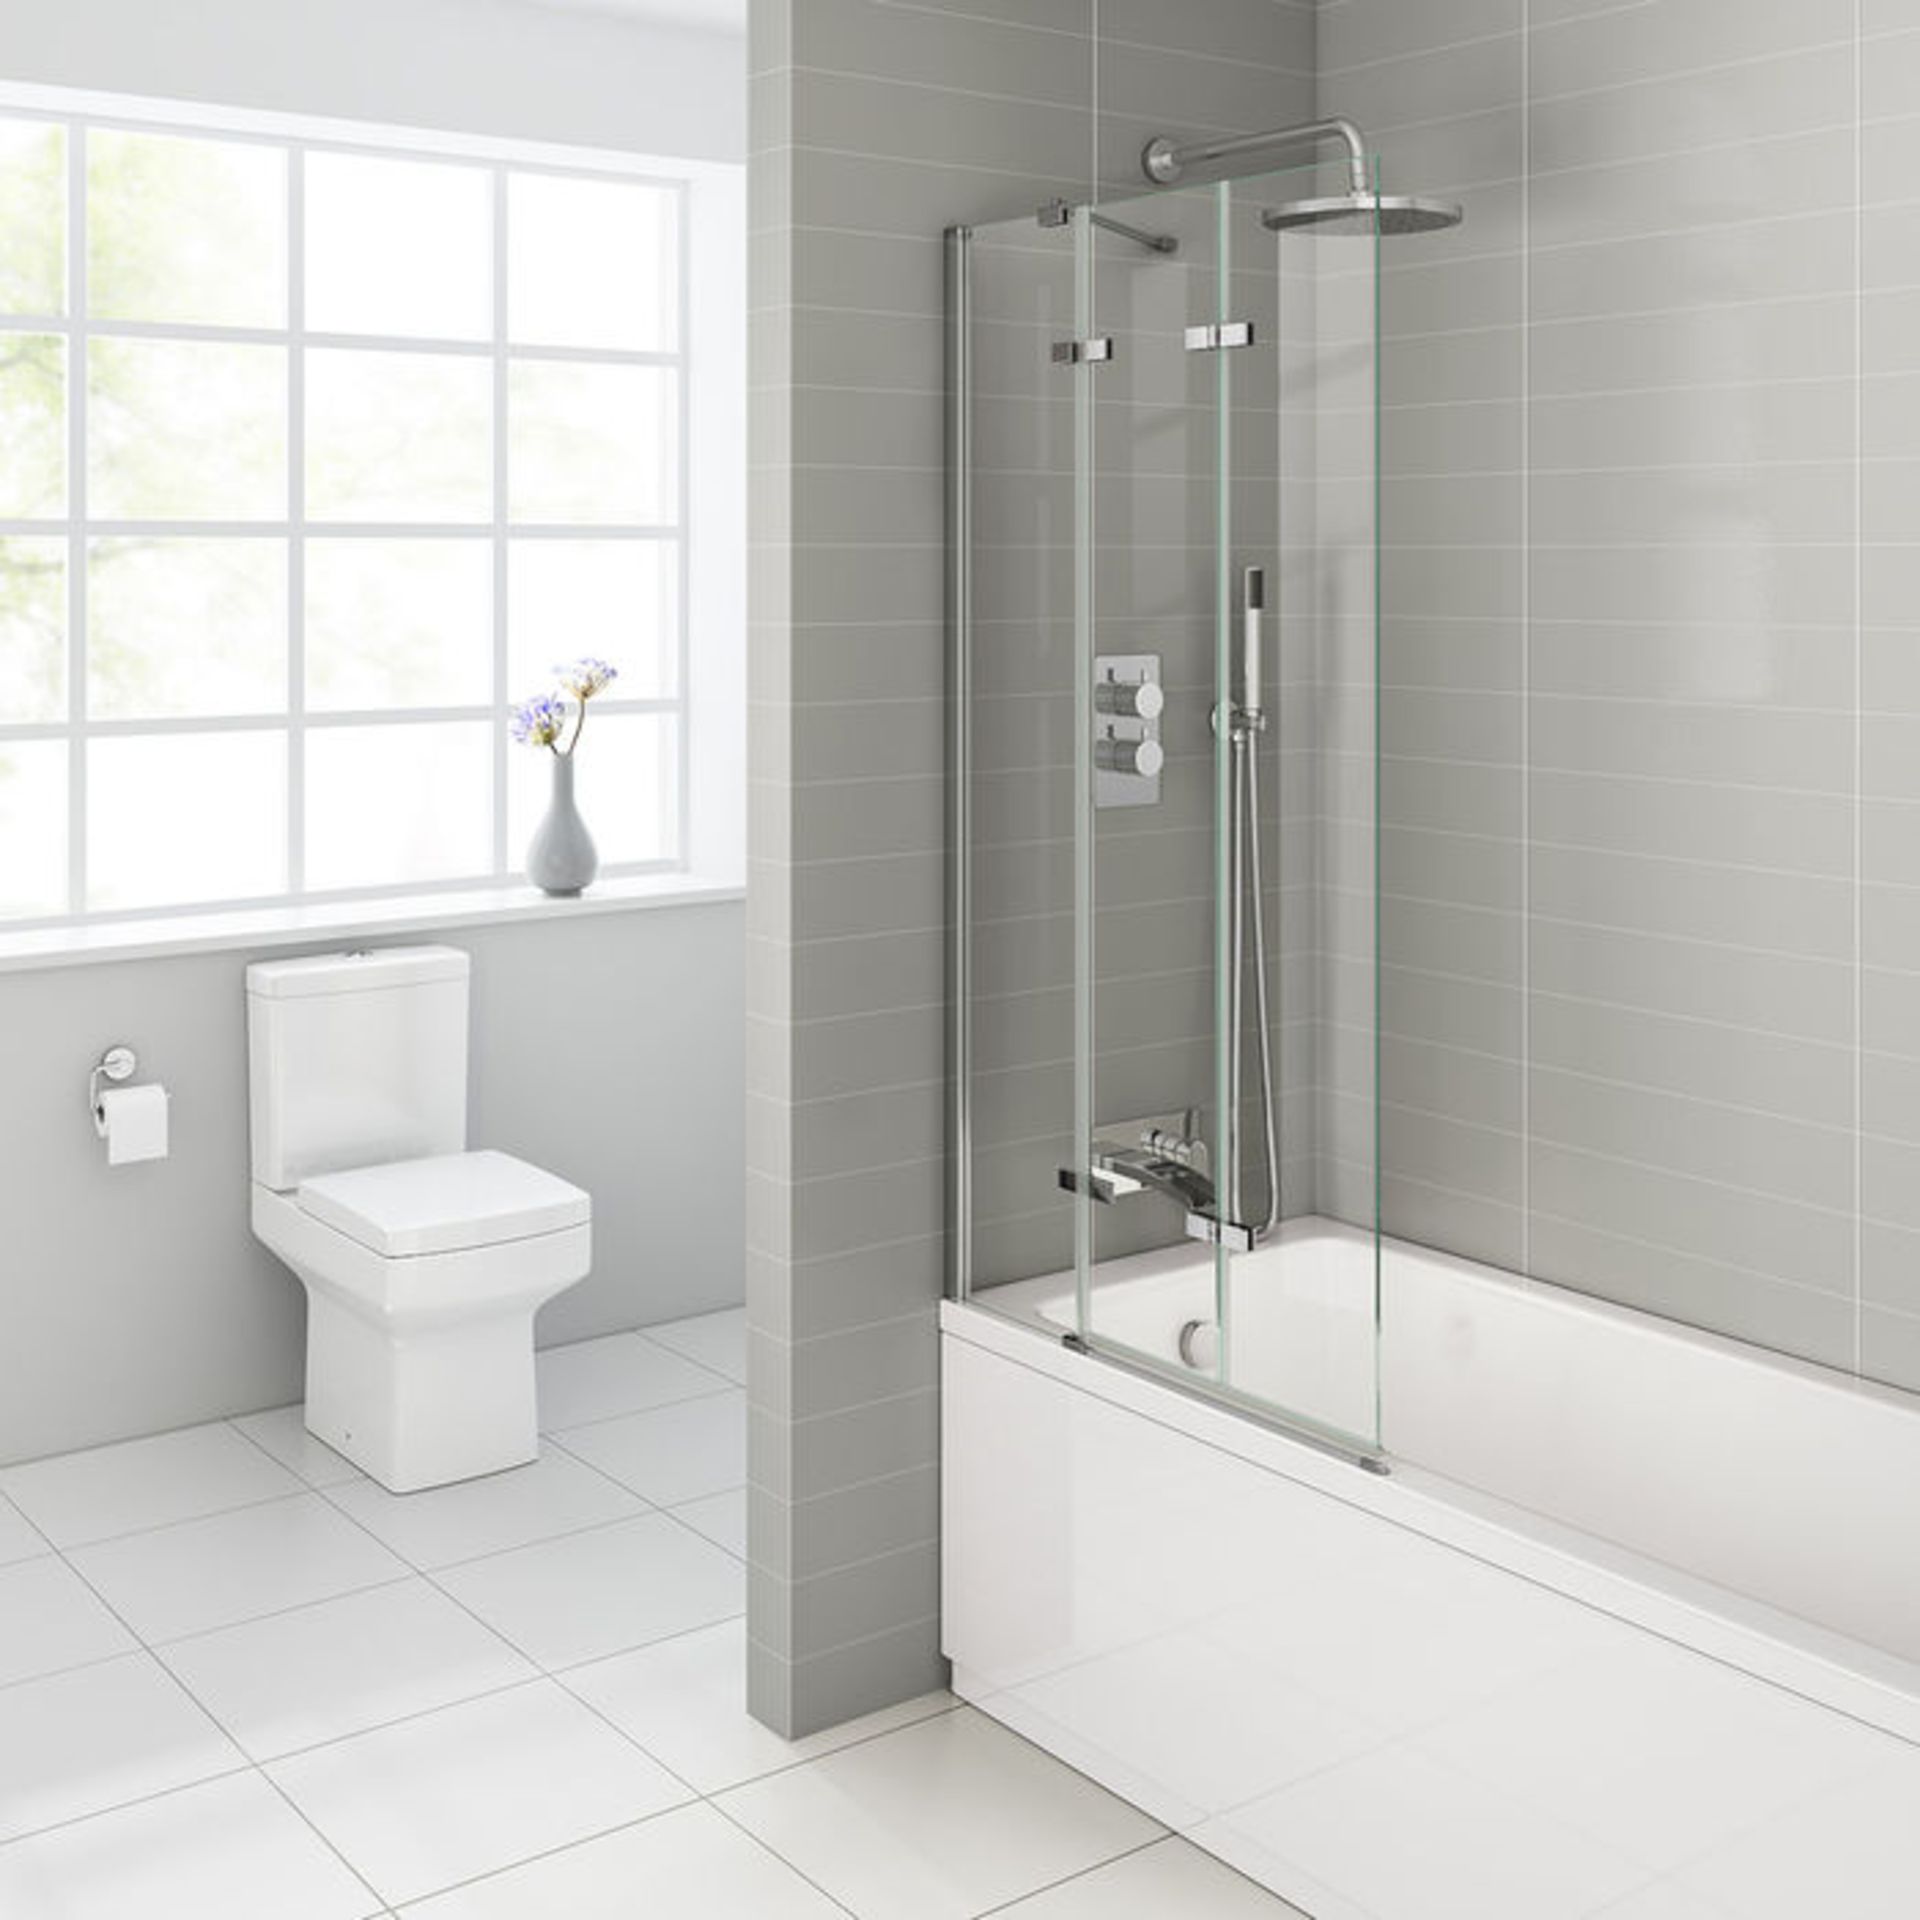 (EY34) 800mm Left Hand Folding Bath Screen - 6mm. RRP £189.99. EasyClean glass - Our glass has - Image 3 of 3